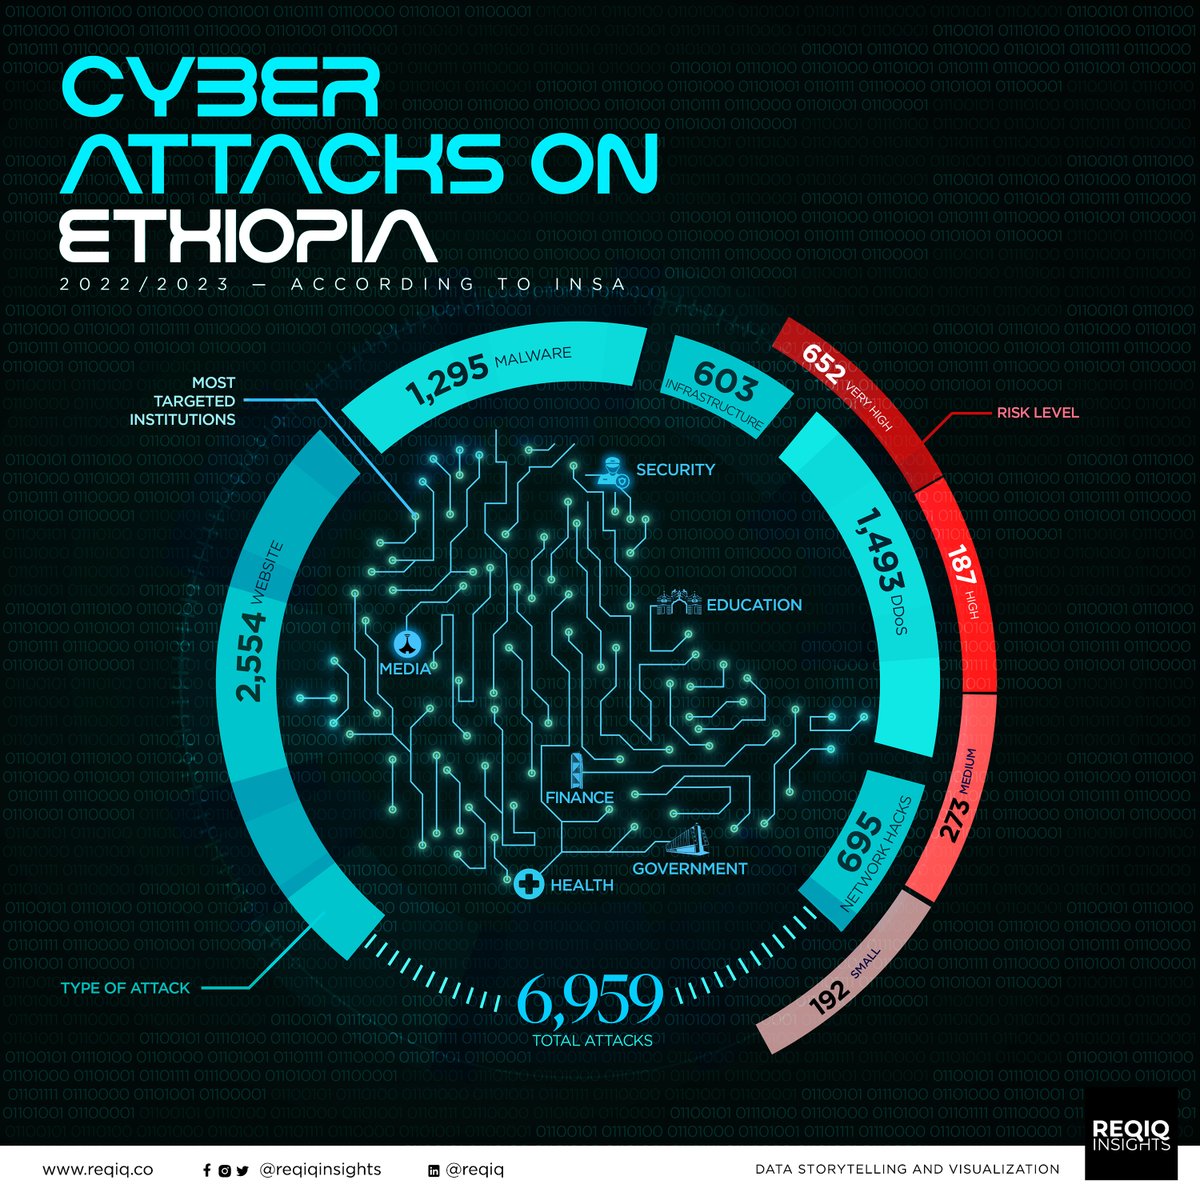 As we wrap up #CybersecurityAwarenessMonth, let's reflect on what we've uncovered about Ethiopia's preparedness and awareness in the face of cyber threats.

Read more and download the hi-res infographics
reqiq.co/a-daunting-dig…